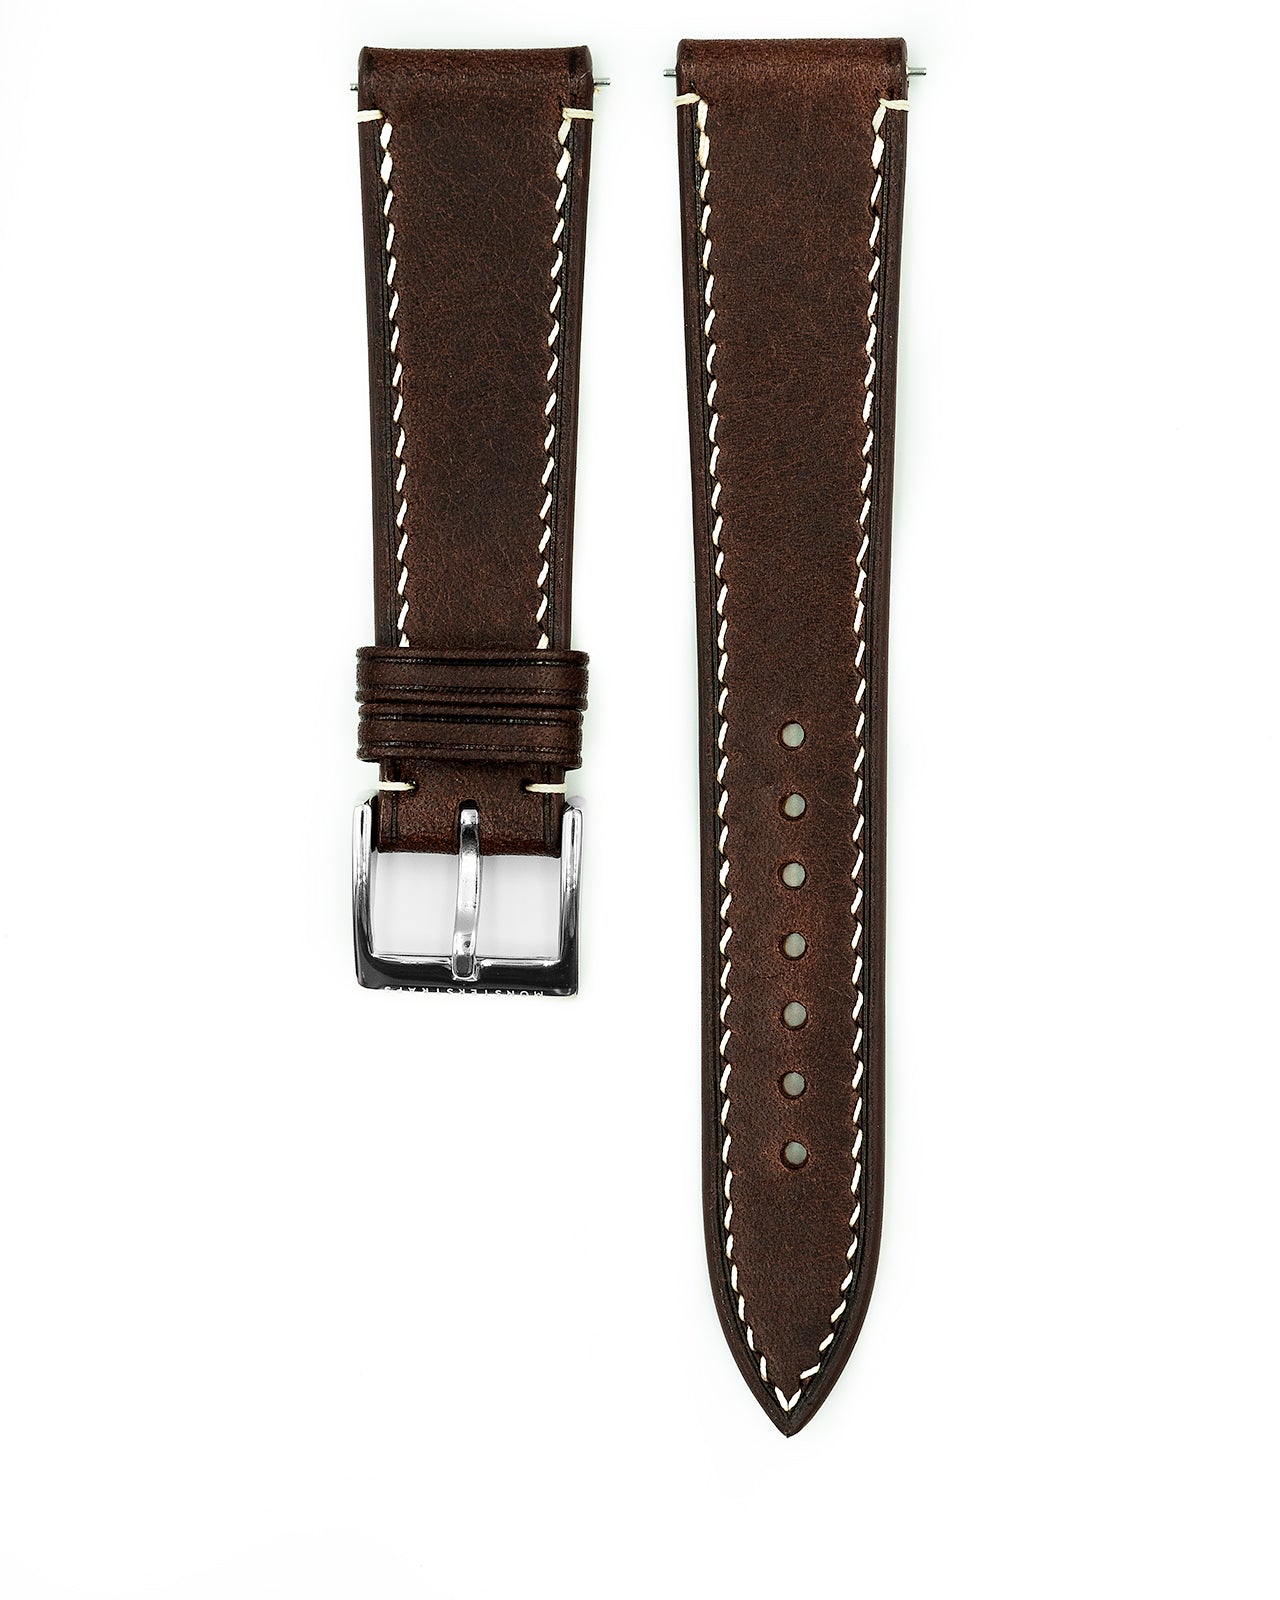 Vintage Italian Waxed Leather Strap (Rust Brown)